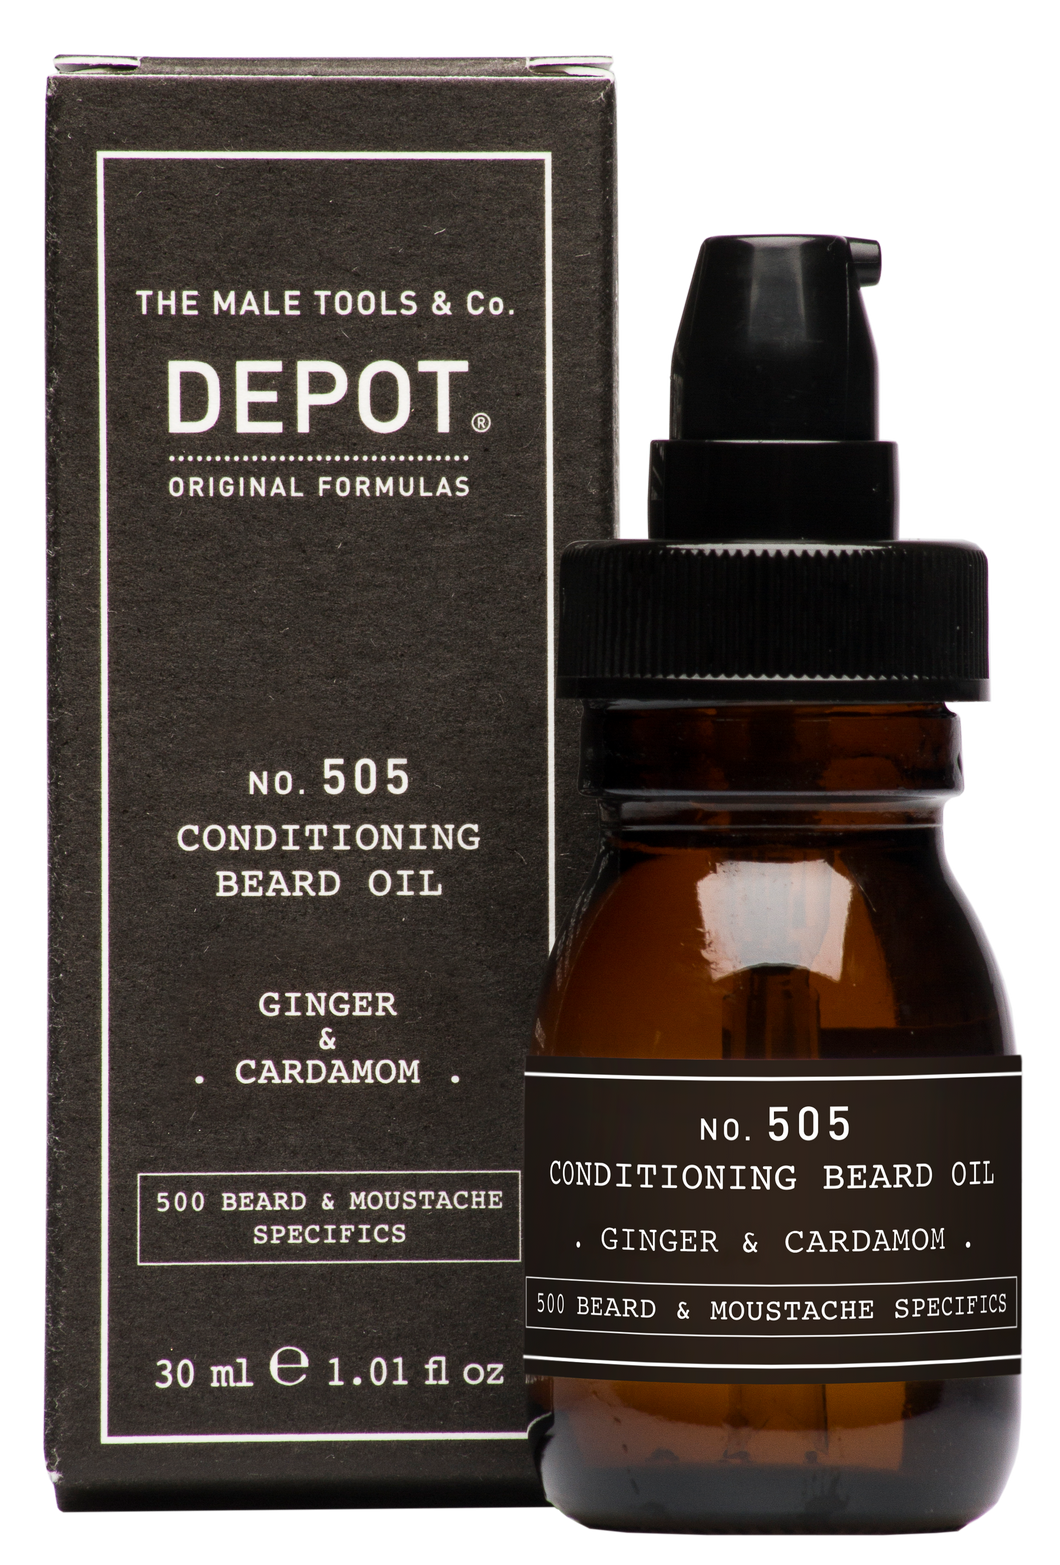 DEPOT MALE TOOL NO. 505 CONDITIONING BEARD OIL GINGER & CARDAMOM